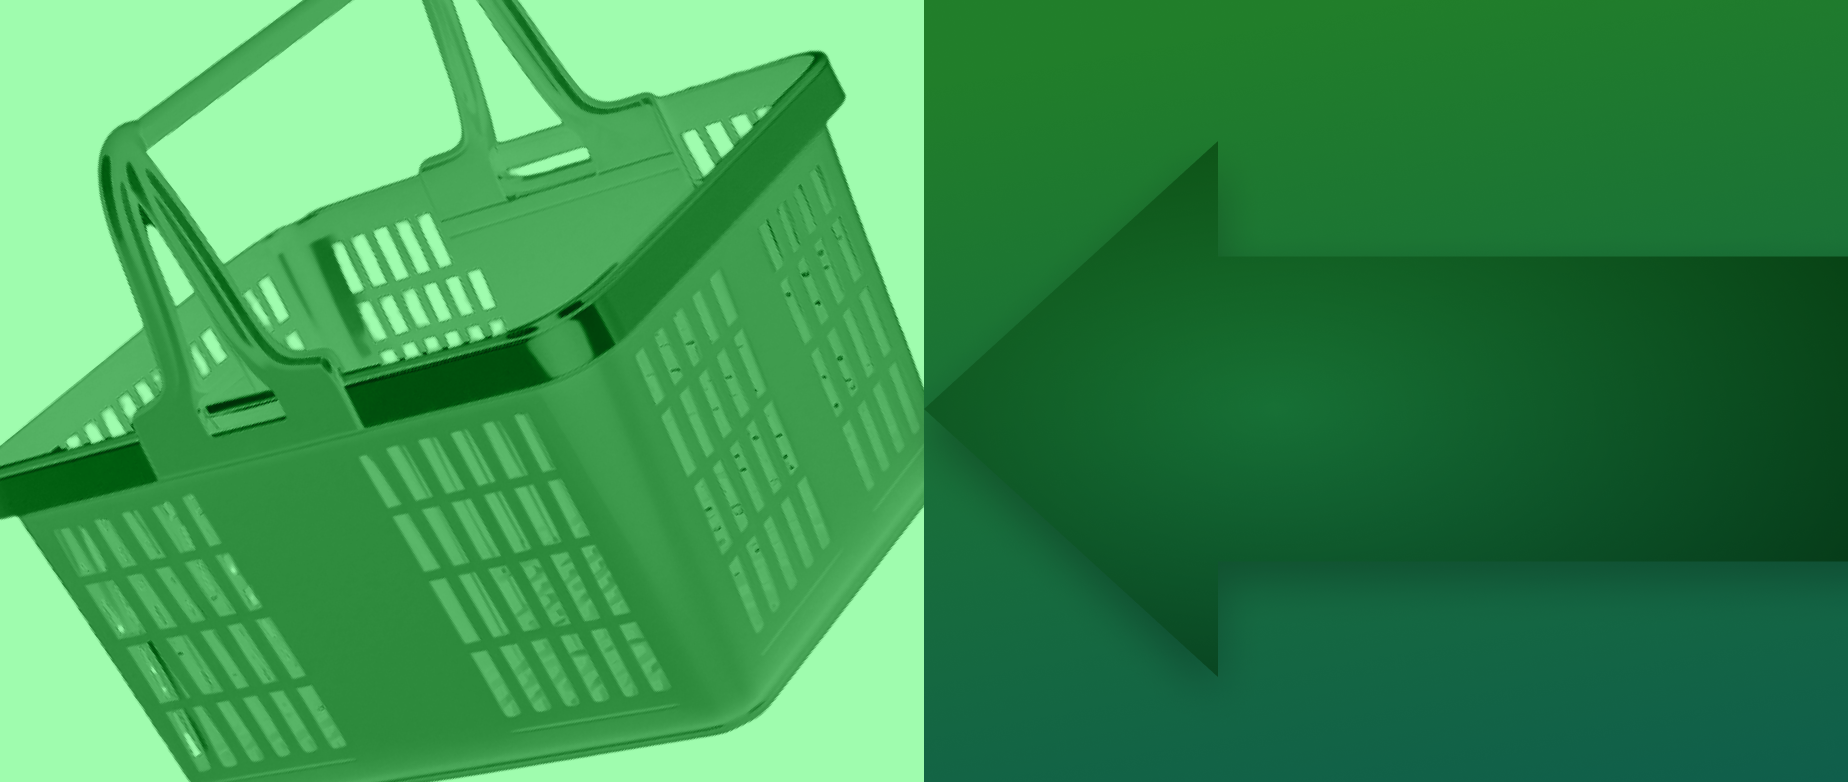 An image of a green shopping basket on a light green background next to a dark green arrow pointing left on a green background.